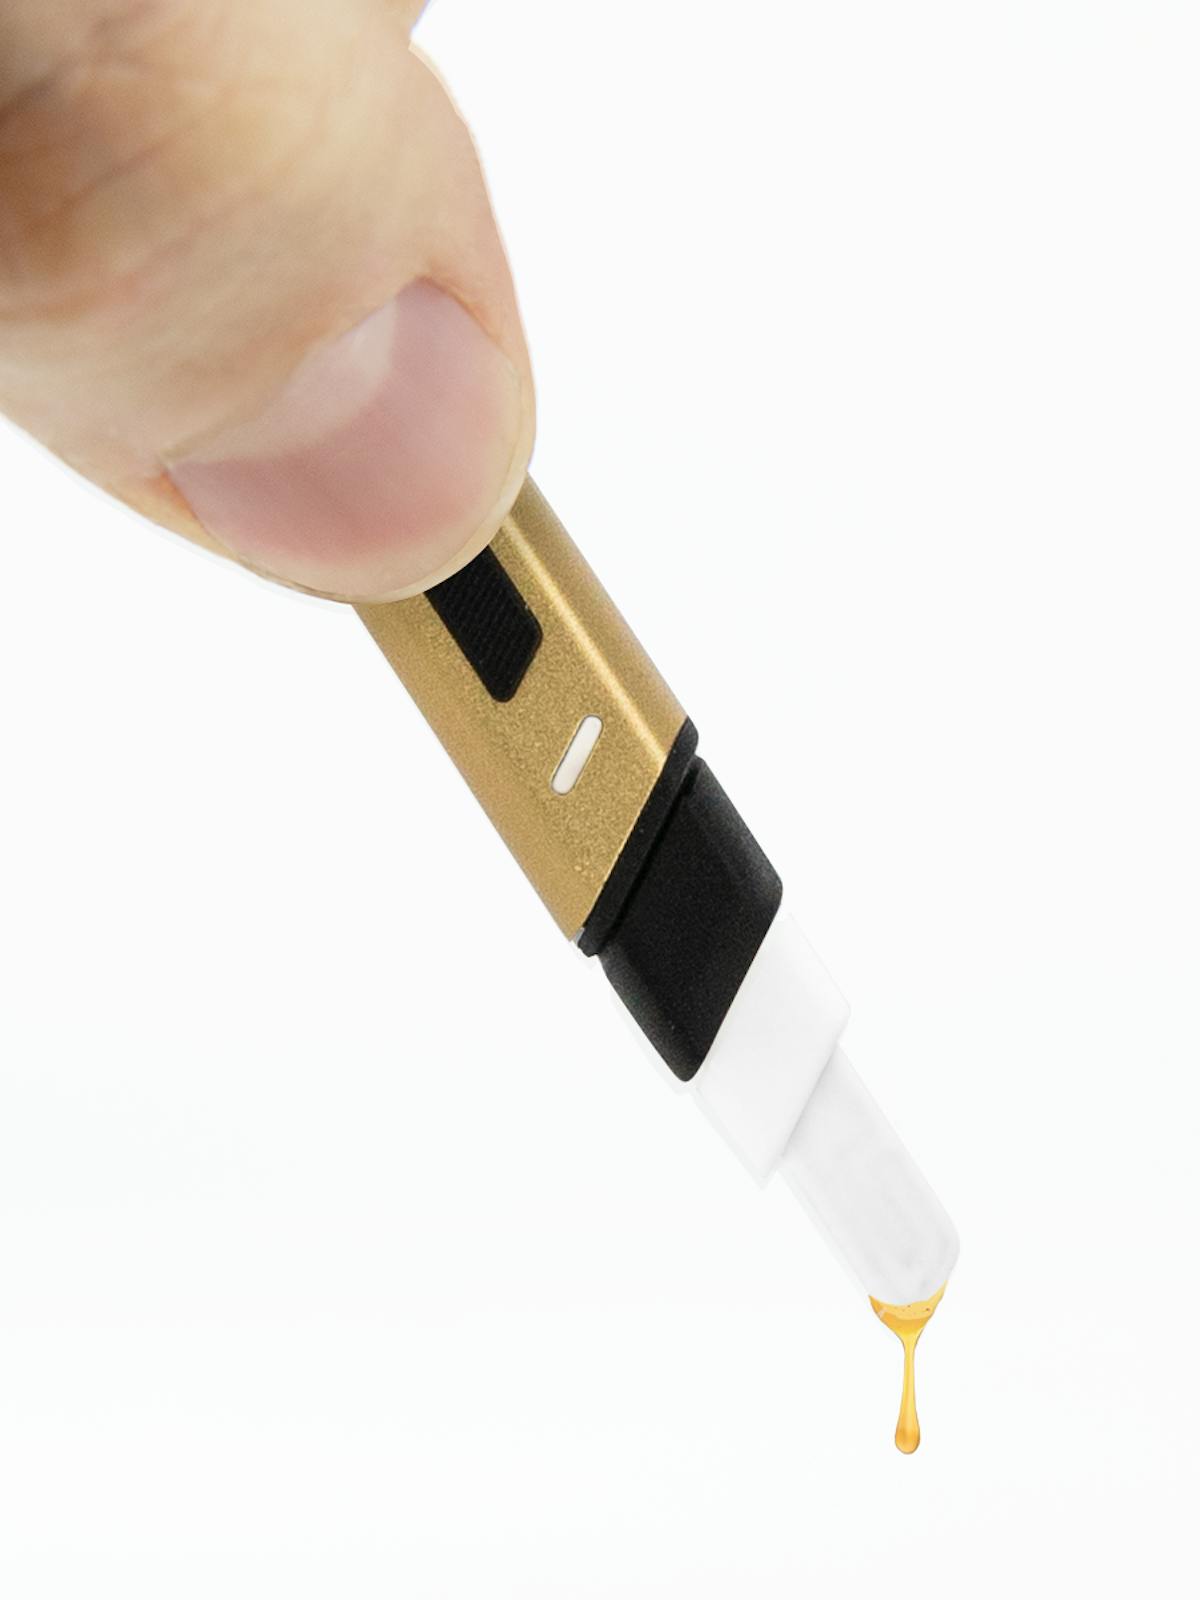 image of The Puffco Hot Knife - Gold